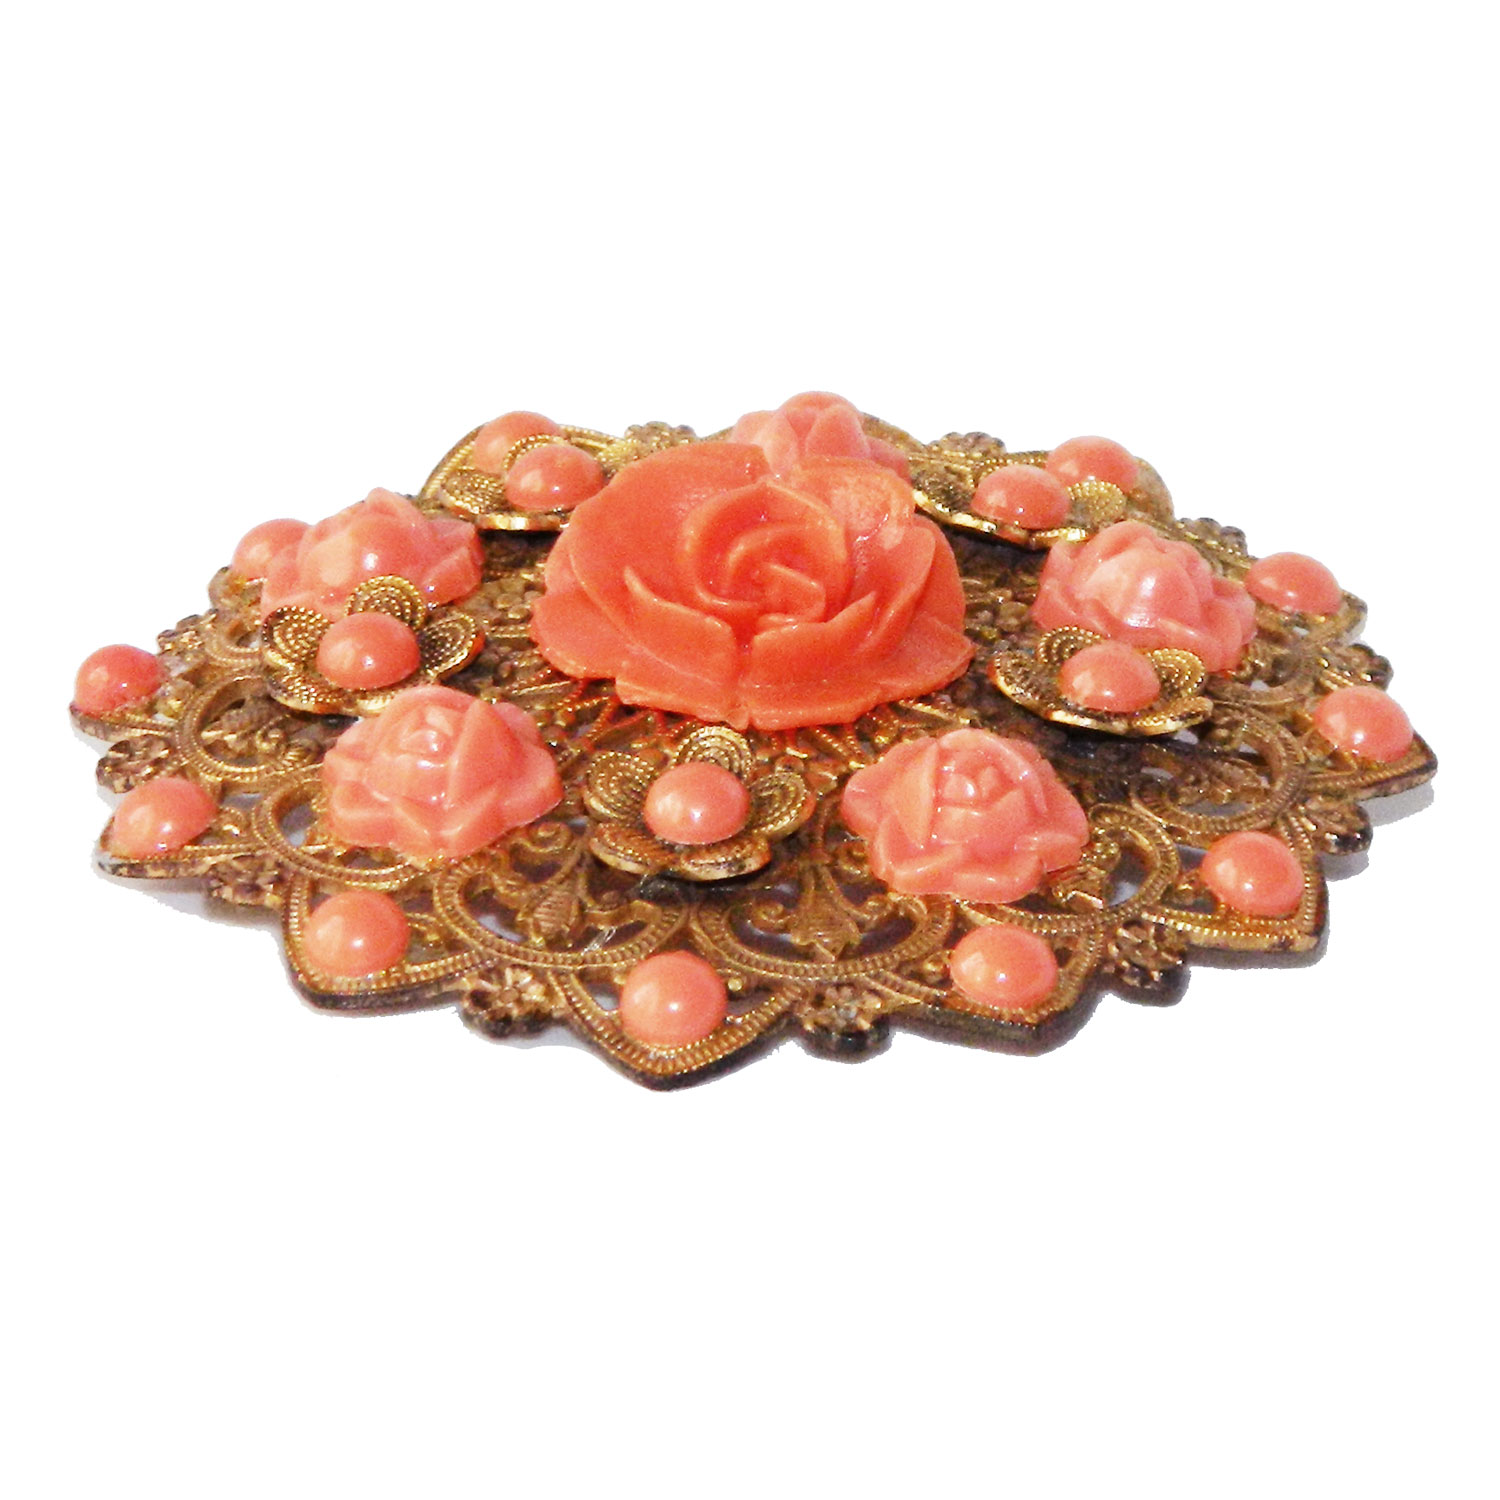 1930s celluloid floral brooch